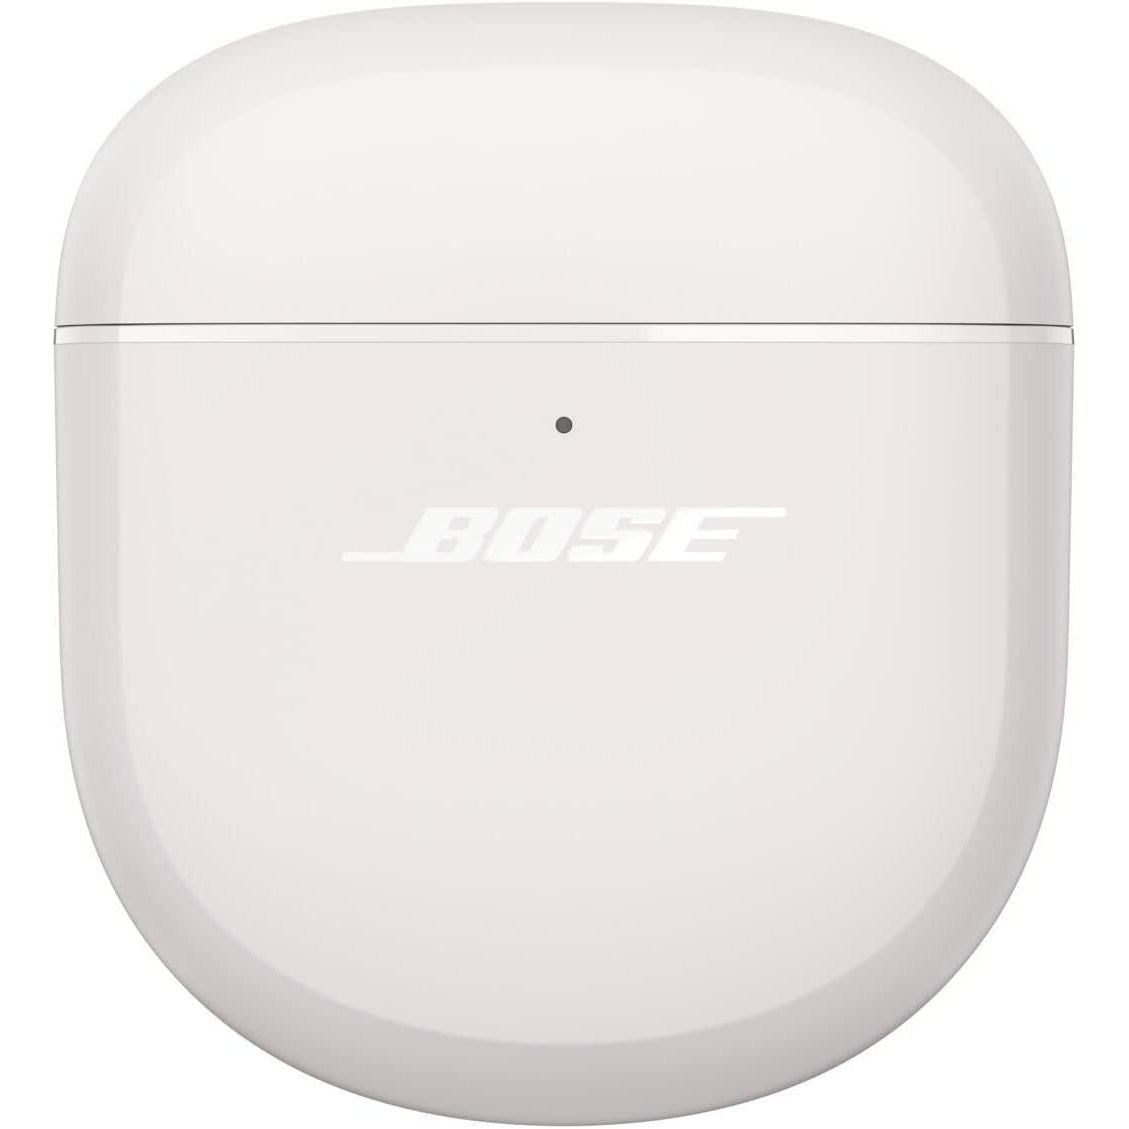 Bose QuietComfort II Wireless Noise-Cancelling Earbuds - White - New